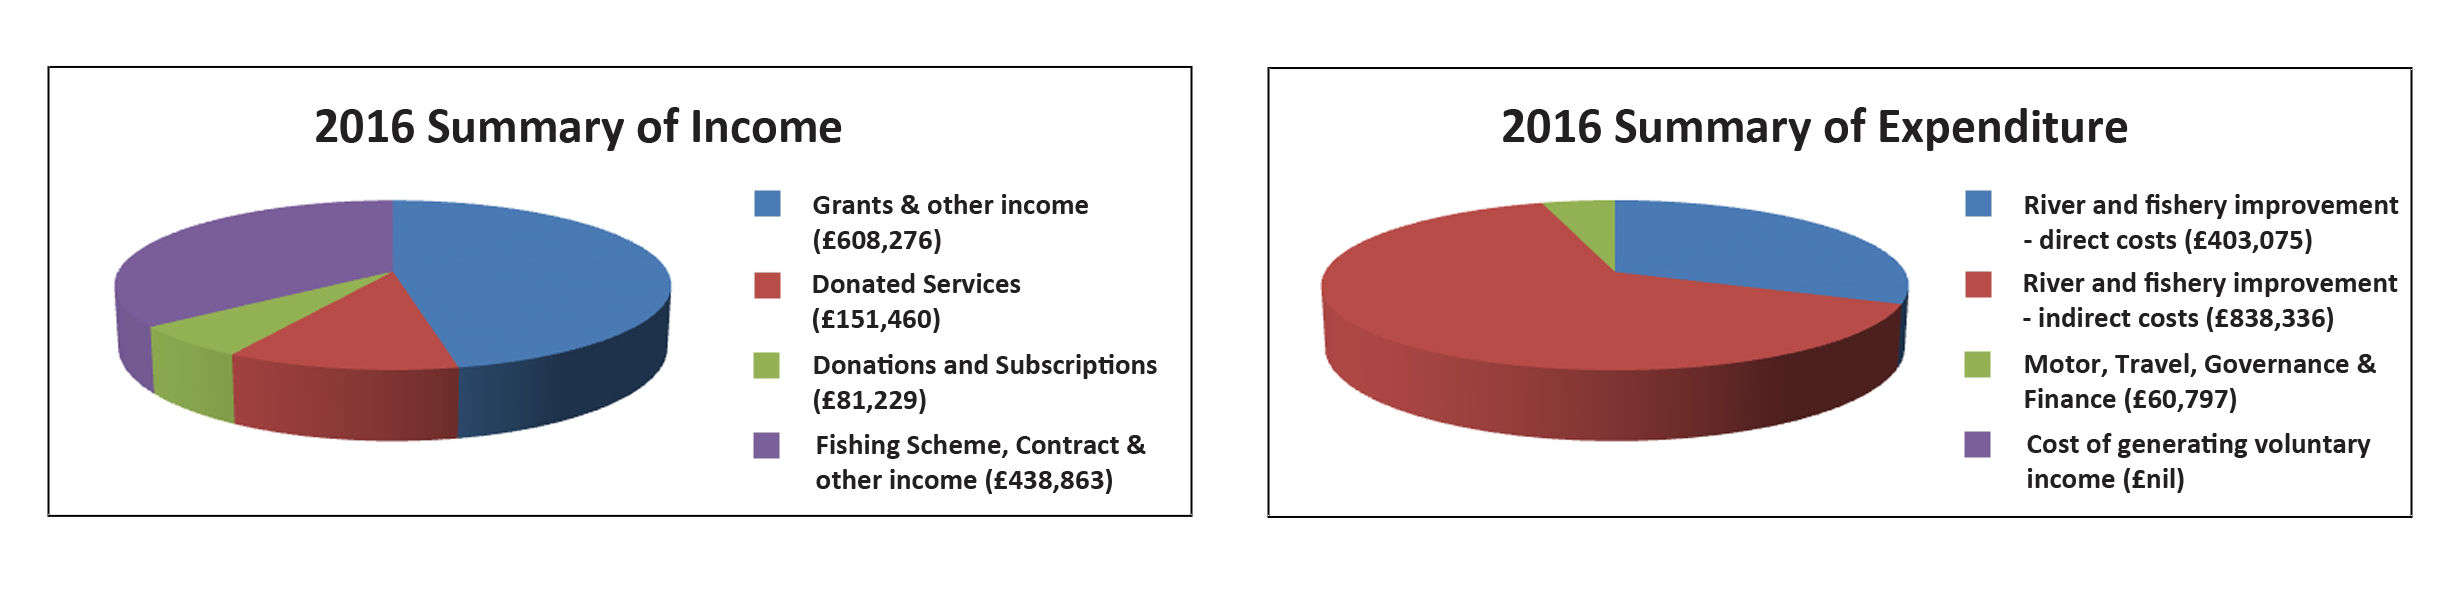 2016 Summary of Income and Expenditure